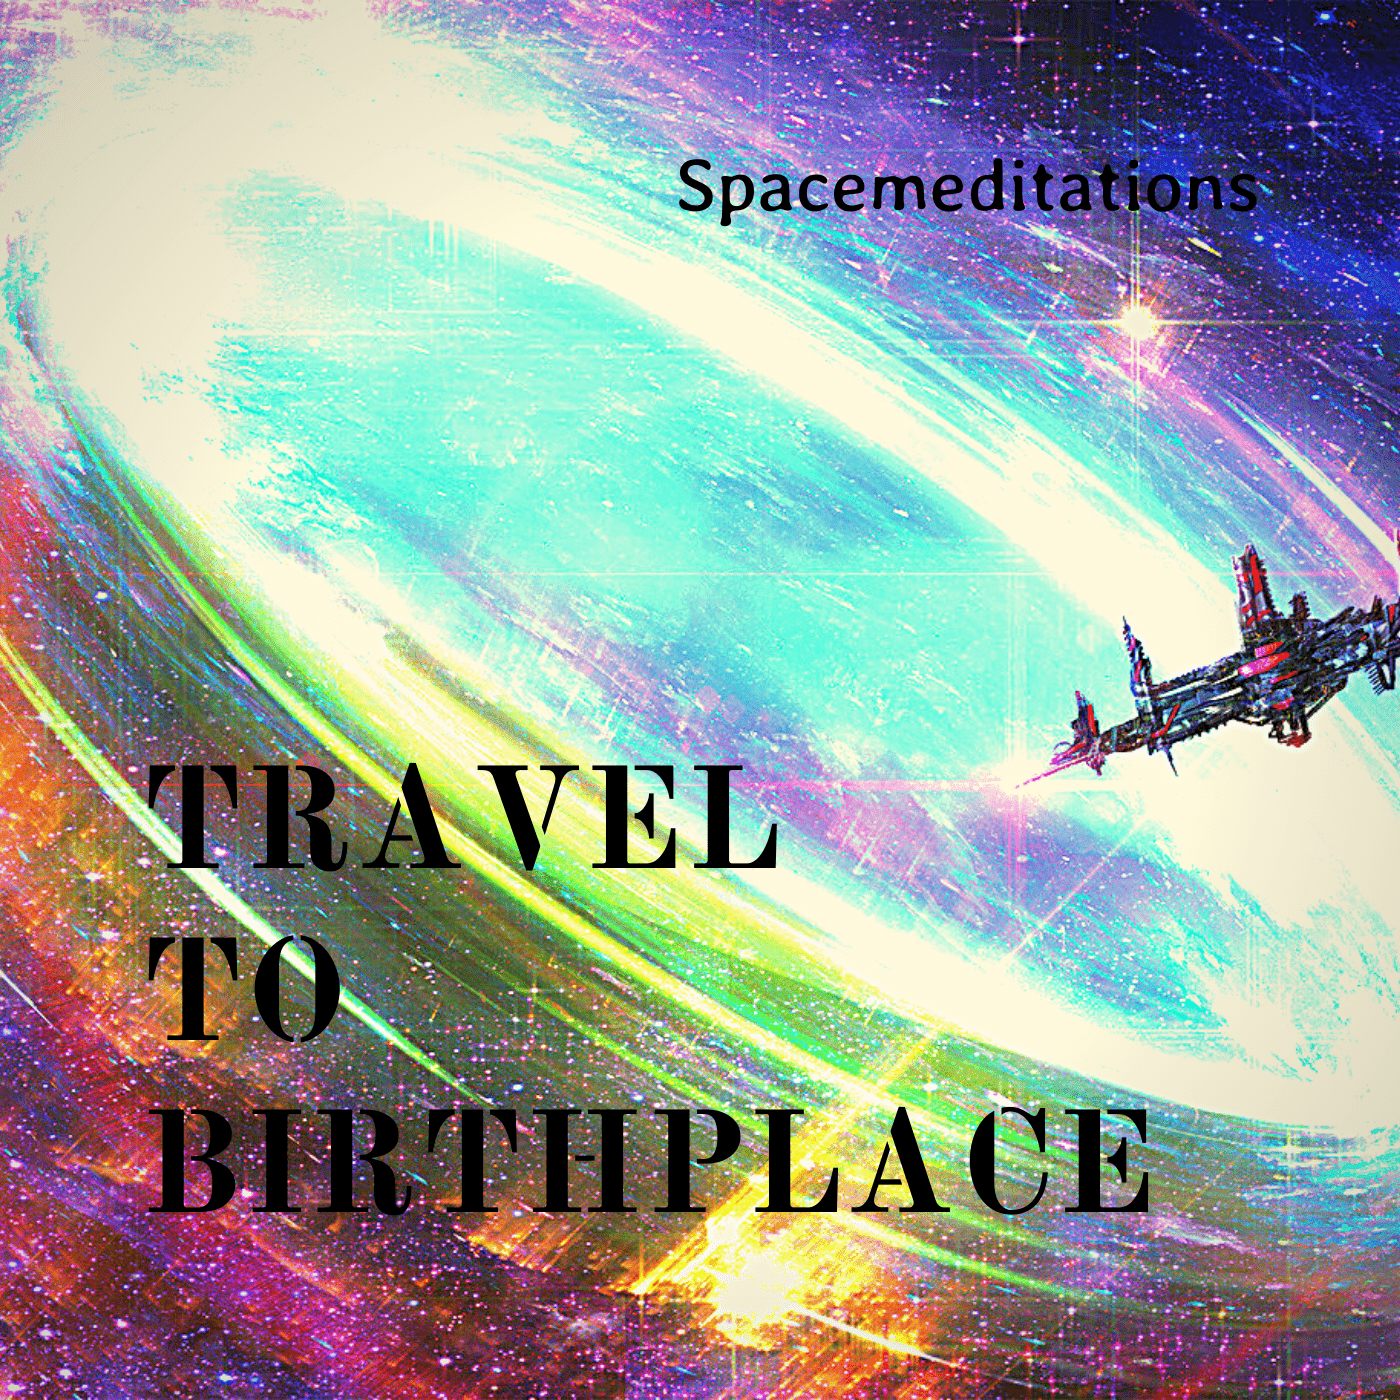 Travel to Birthplace. Spacemeditations